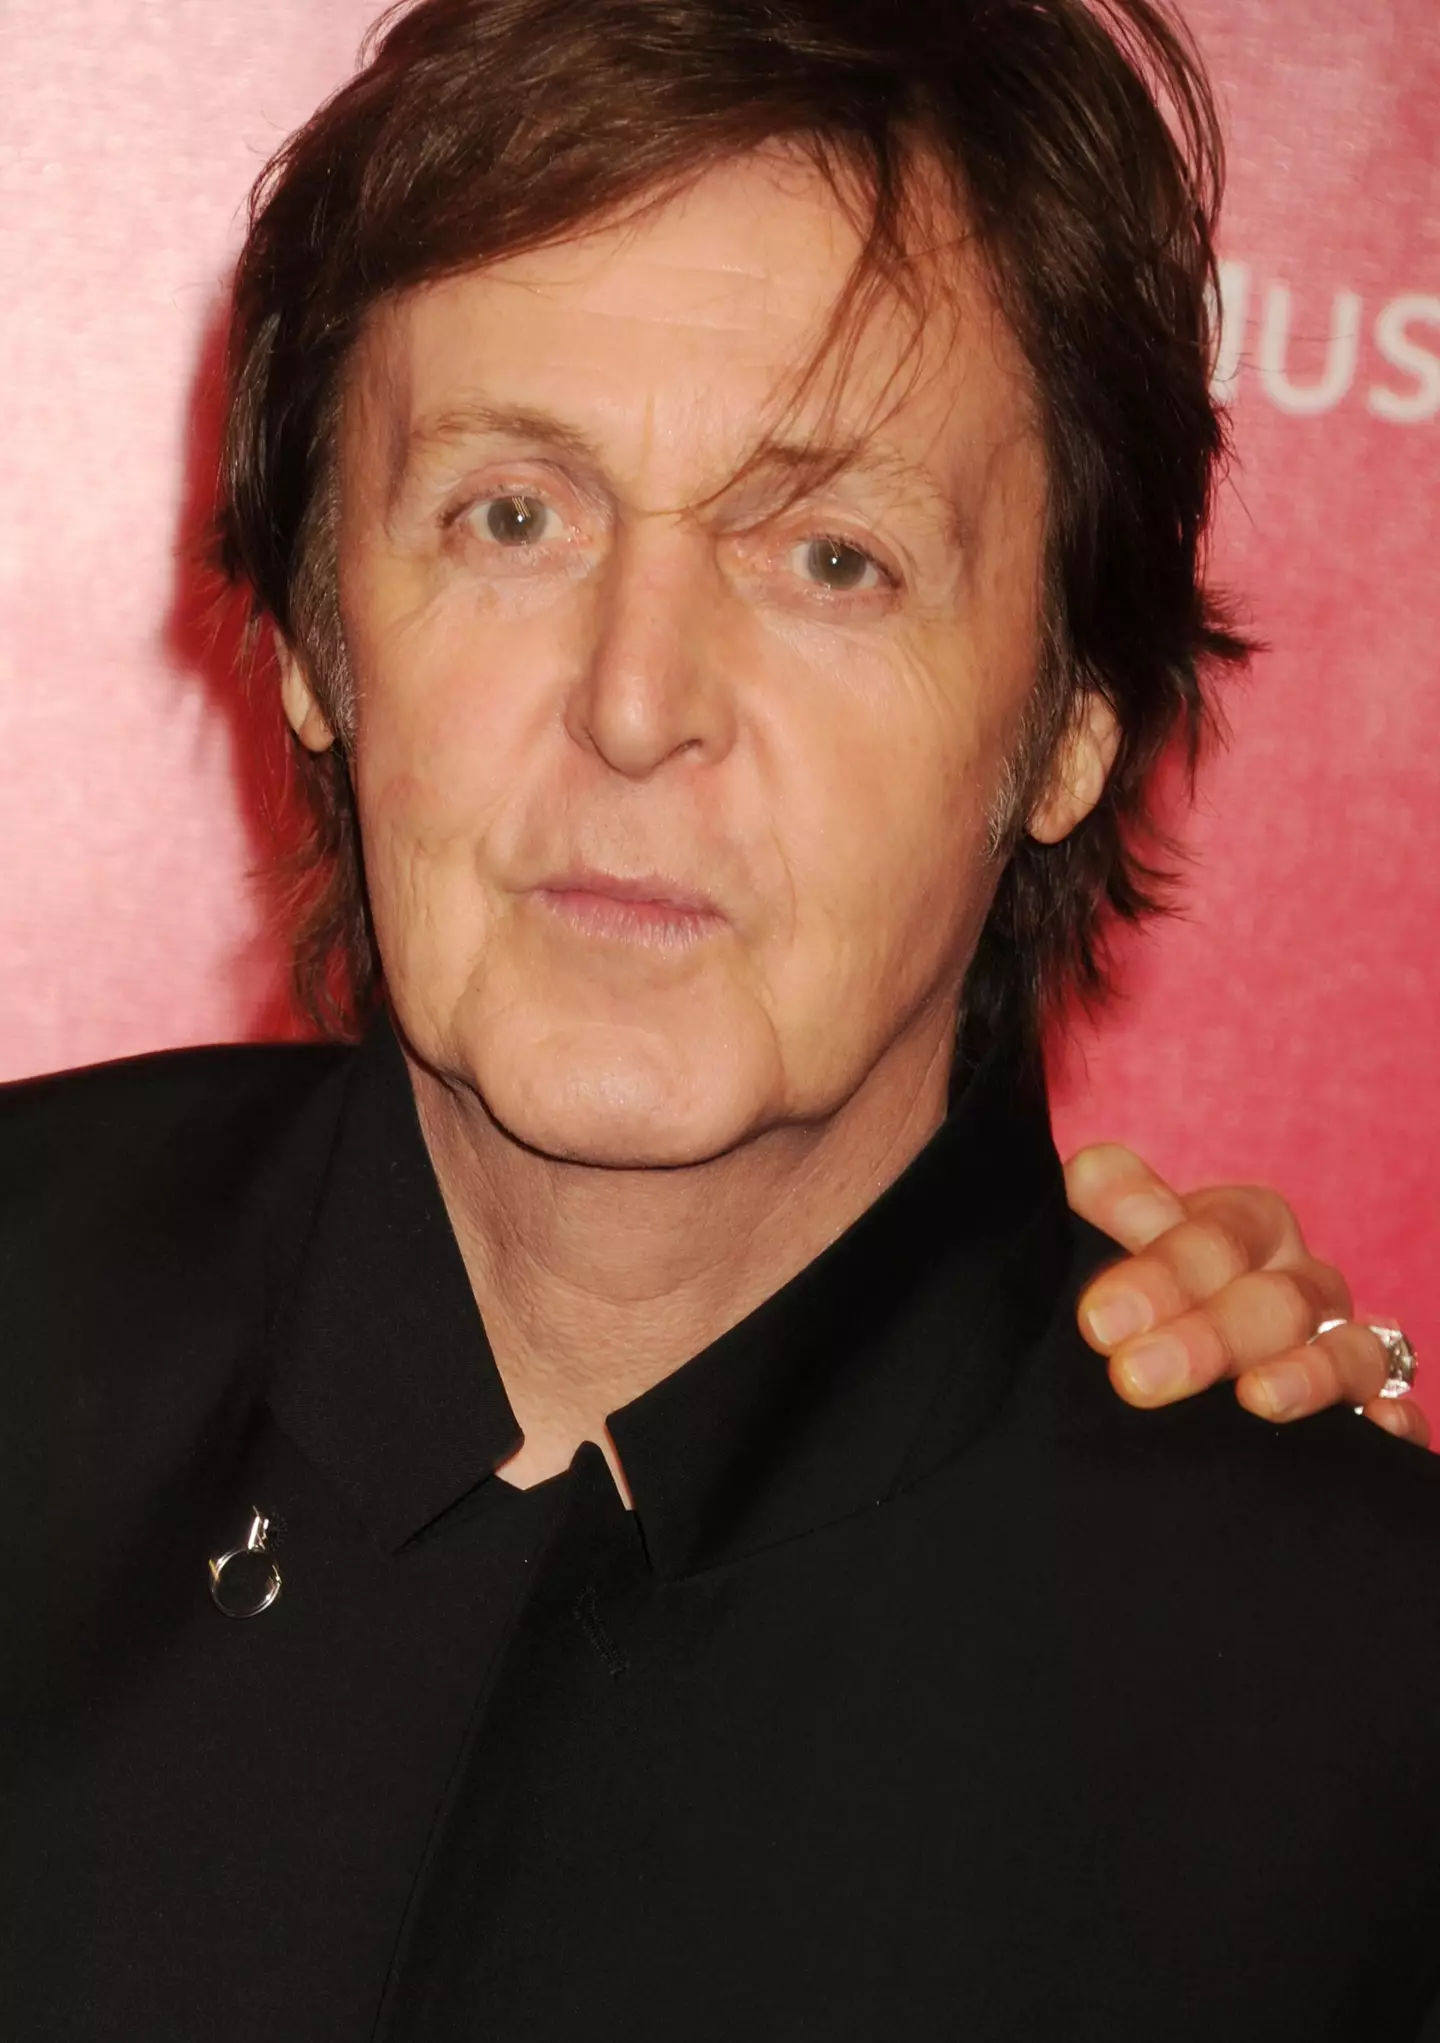 Paul McCartney was touched by Mali's story.